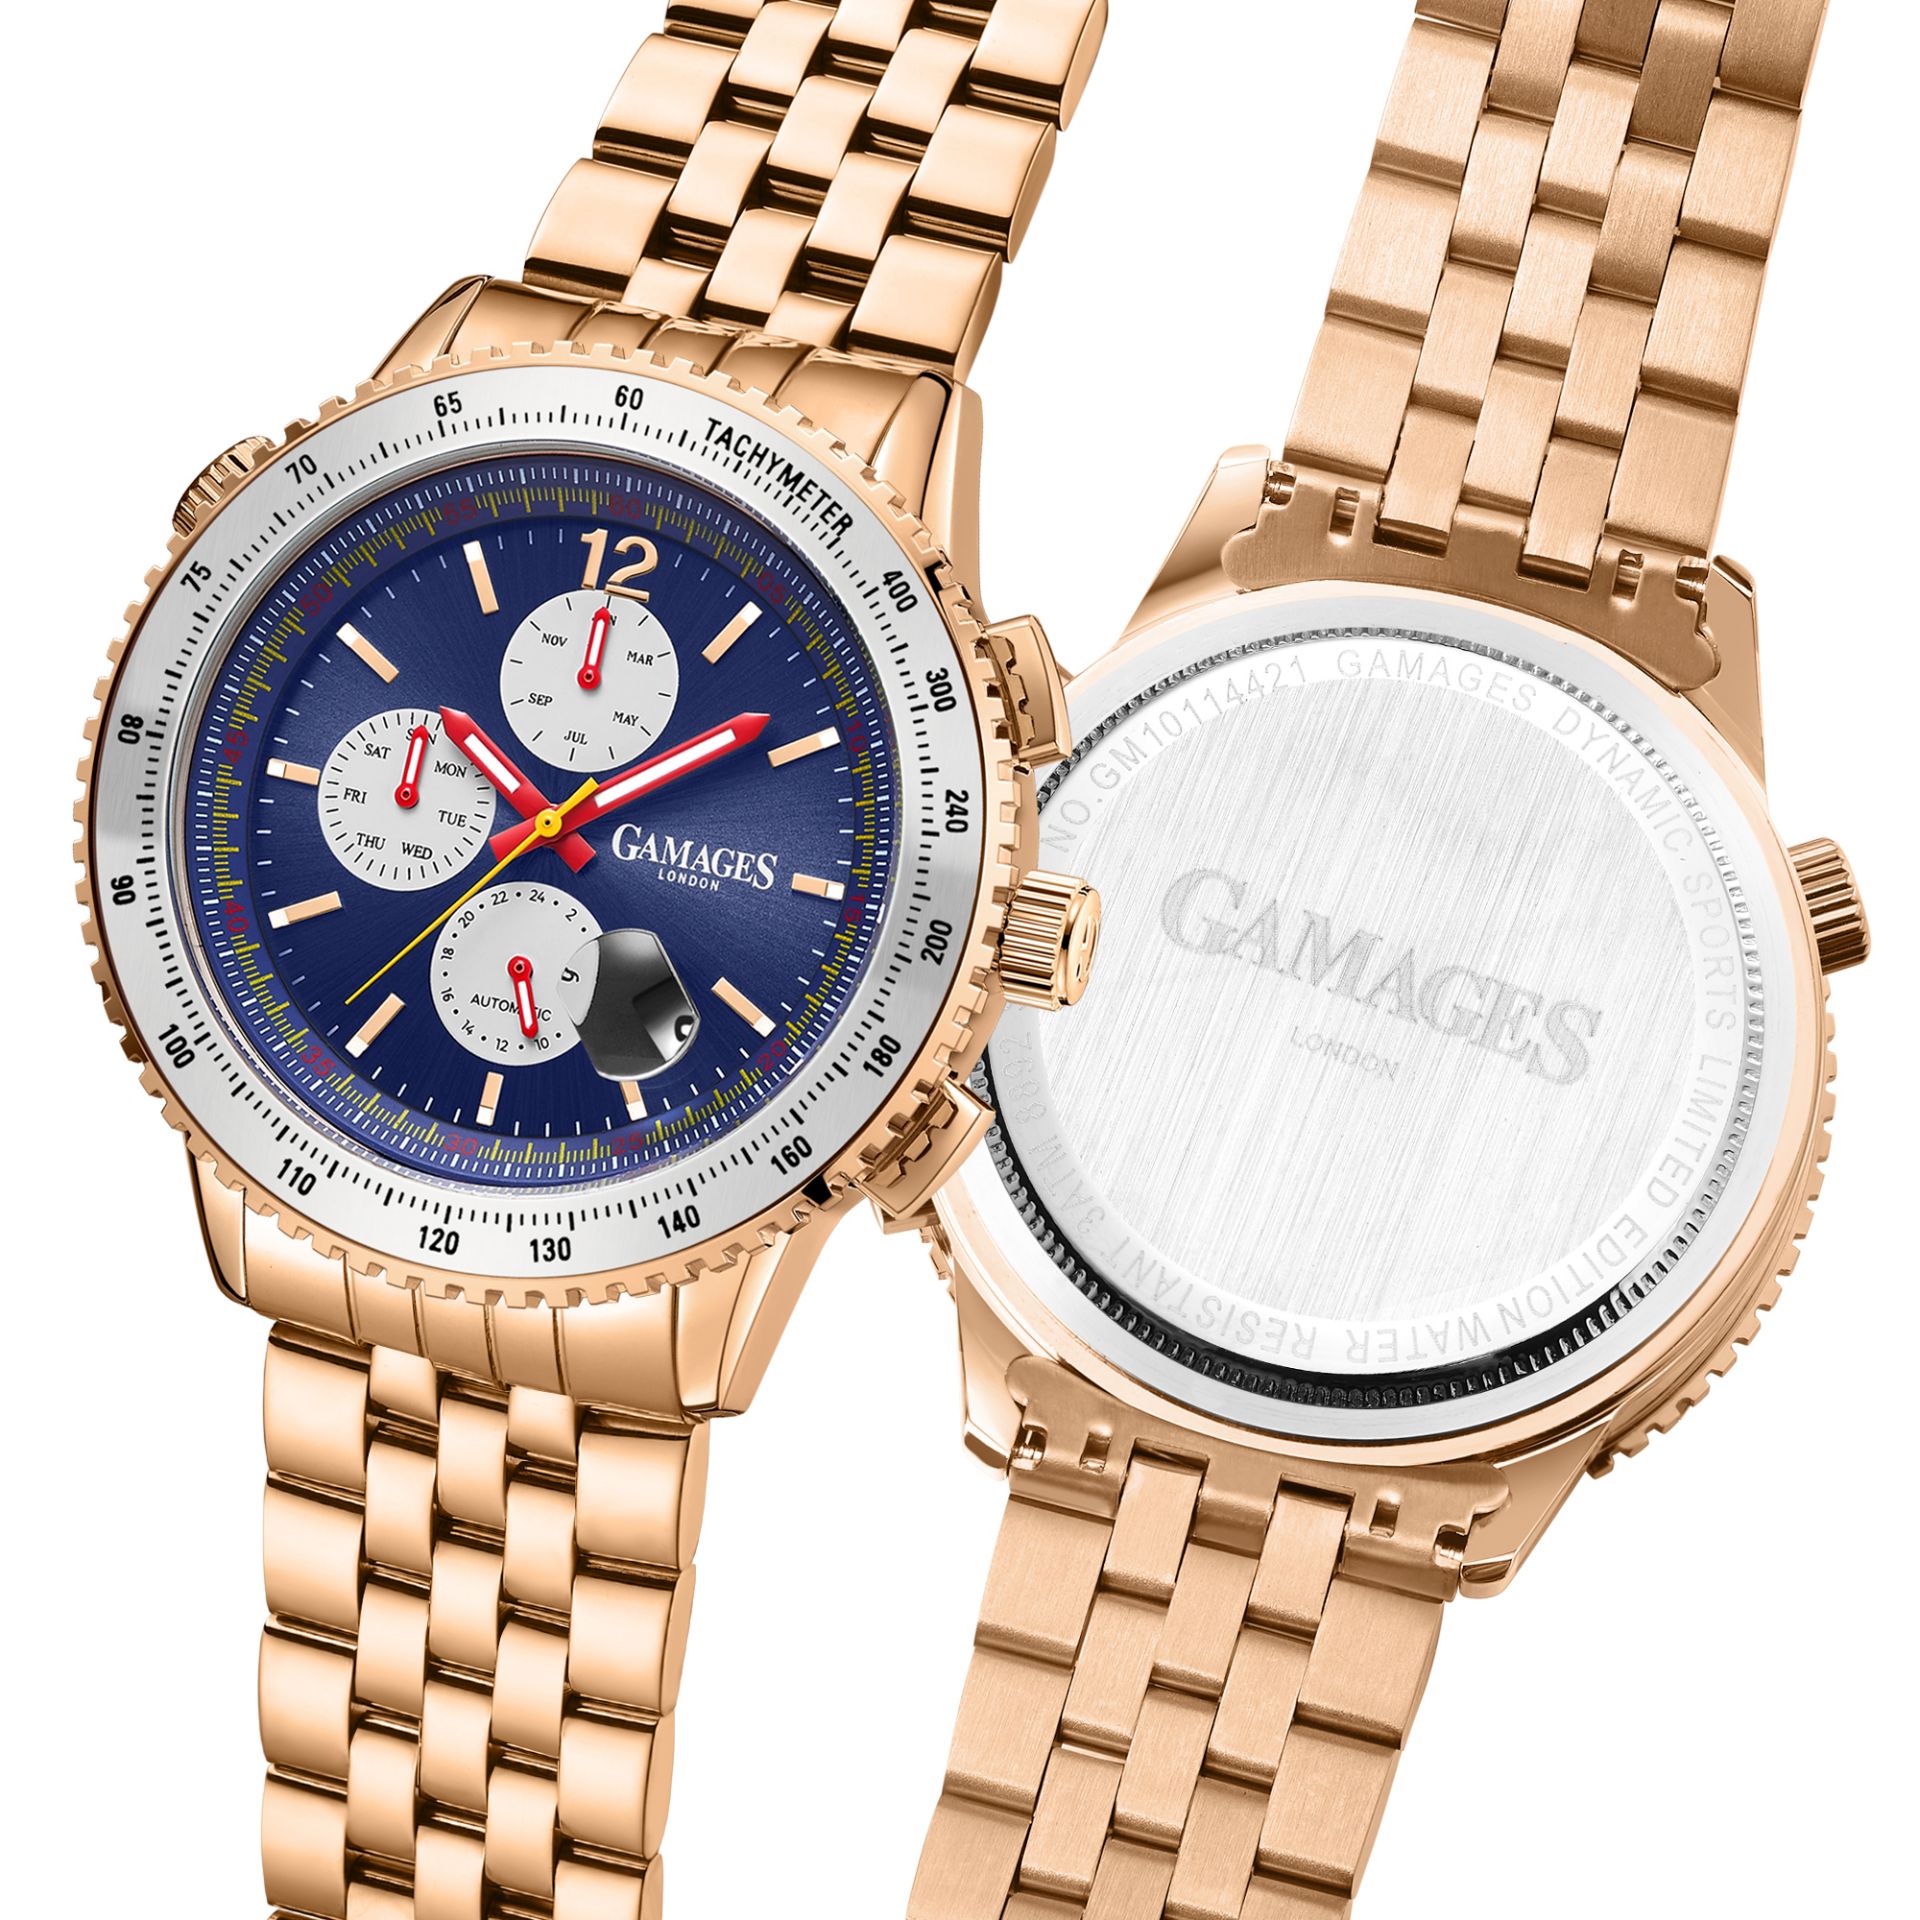 Ltd Edition Hand Assembled Gamages Dynamic Sports Automatic Rose – 5 Year Warranty & Free Delivery - Image 5 of 5